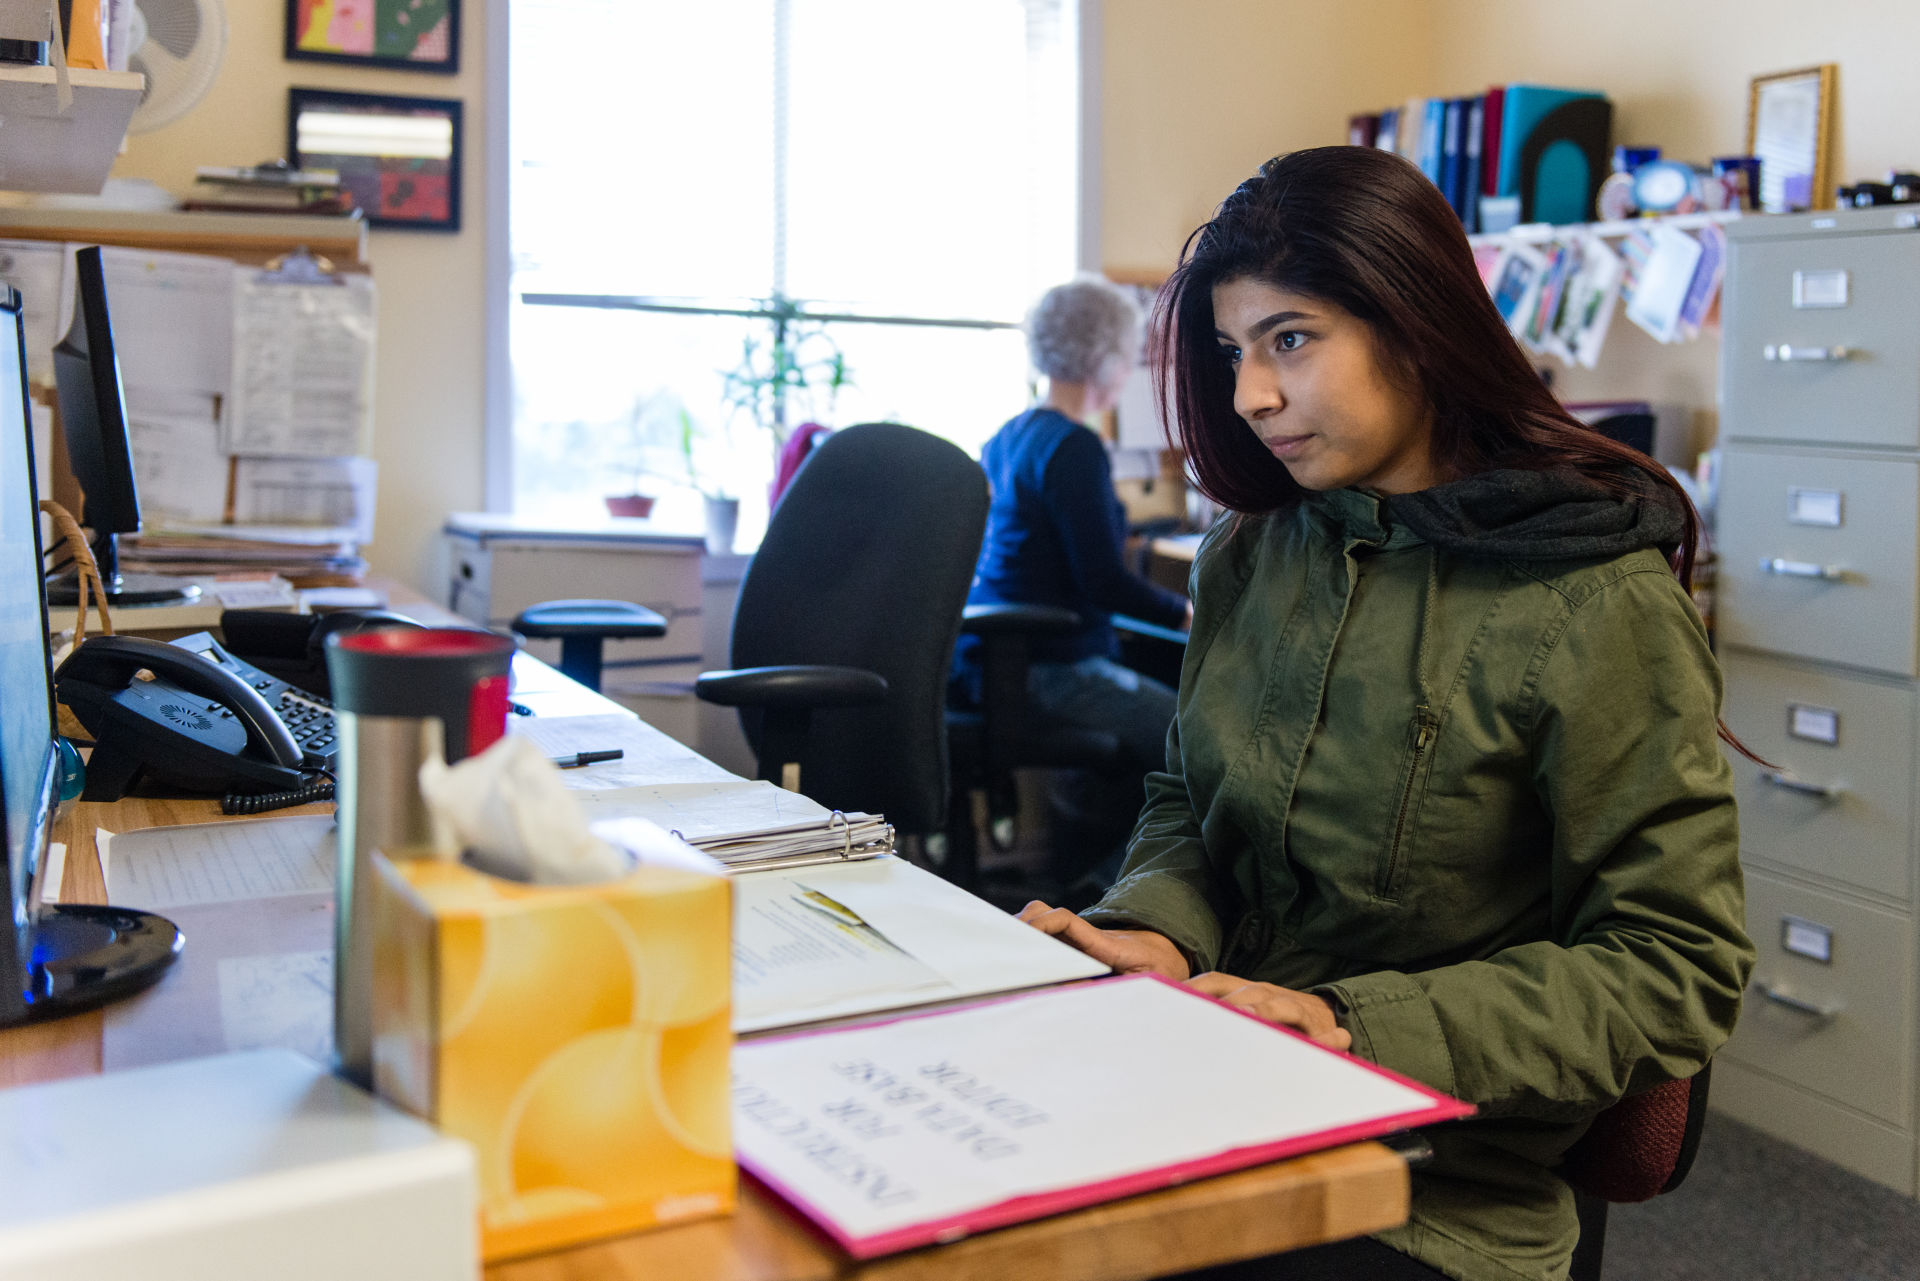 Nubia Flores Miranda, 18, works part-time at Family Paths, a counseling and mental health organization in Oakland. Miranda said she became interested in a career in mental health after she started experiencing depression and anxiety her freshman year at Life Academy of Health and Bioscience. 